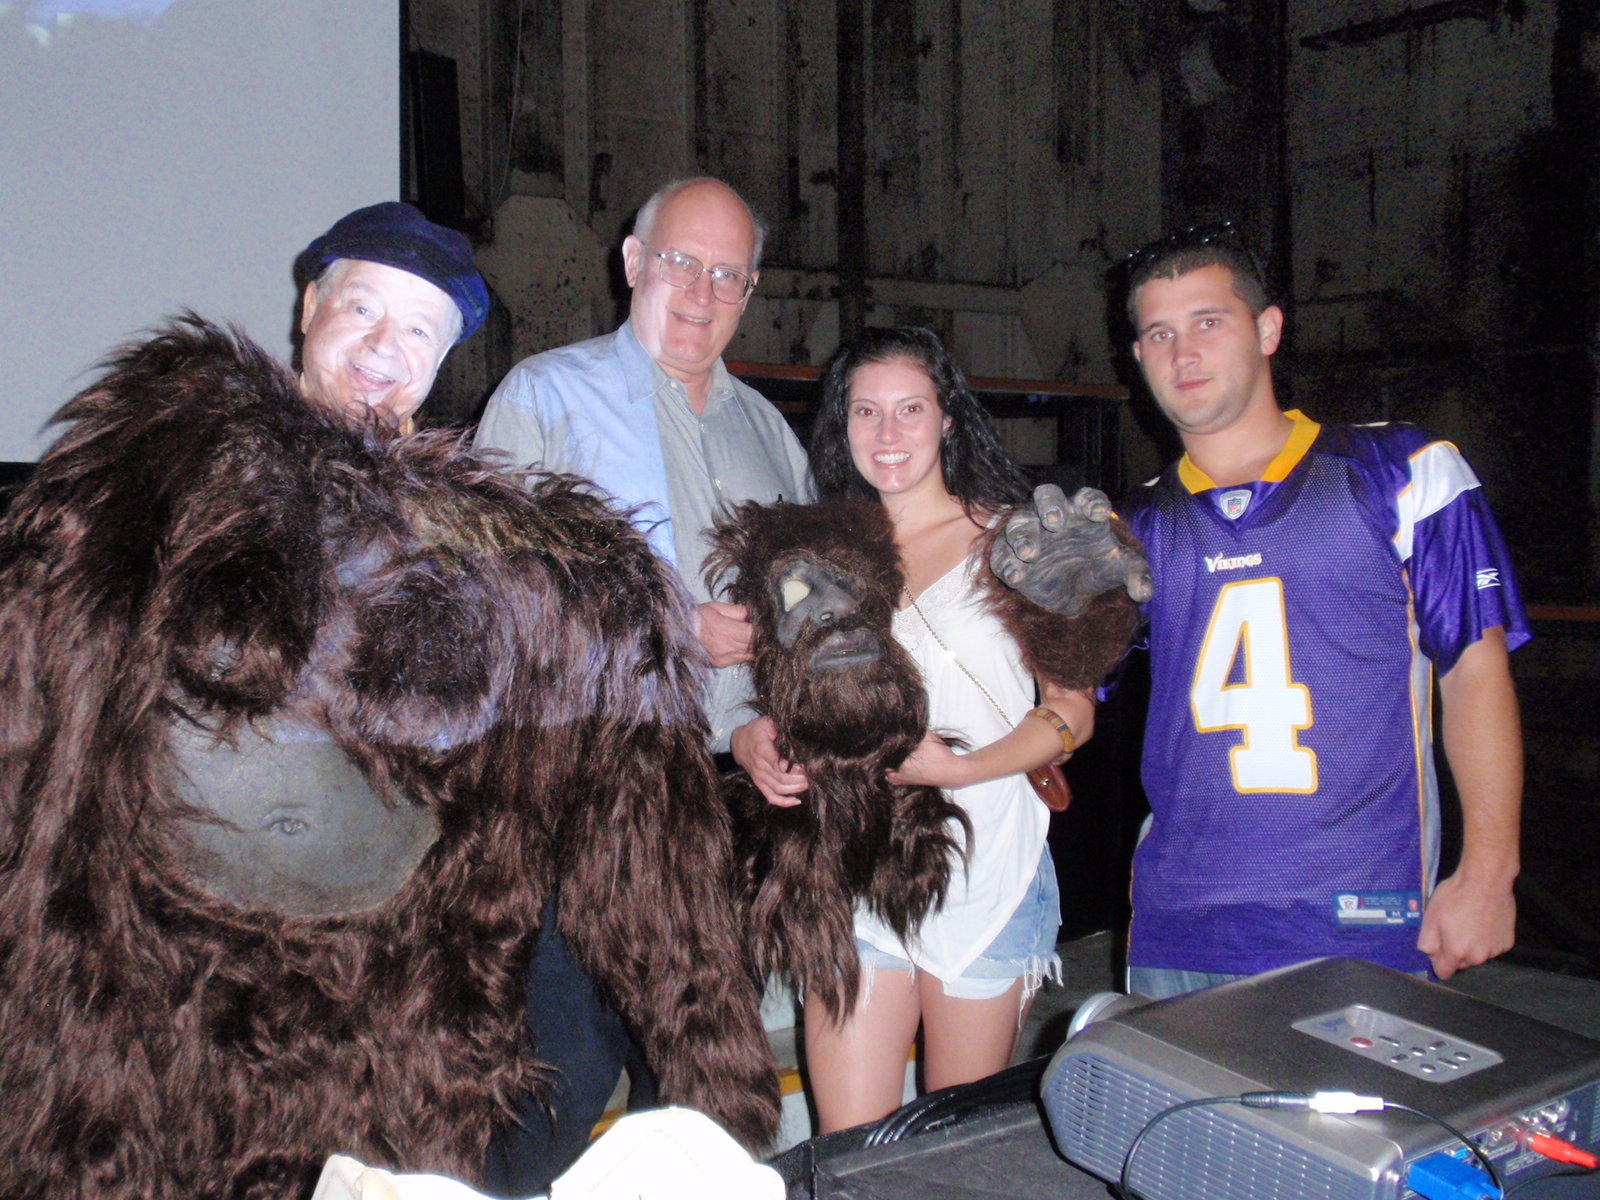  Philip Morris at far left holding his Bigfoot costume; Arlee Bird to the right of Morris, from whose blog   Tossing It Out   this photo was acquired.&nbsp;&nbsp;Photo taken by Los Angeles magician,  Whit "Pop" Haydn  